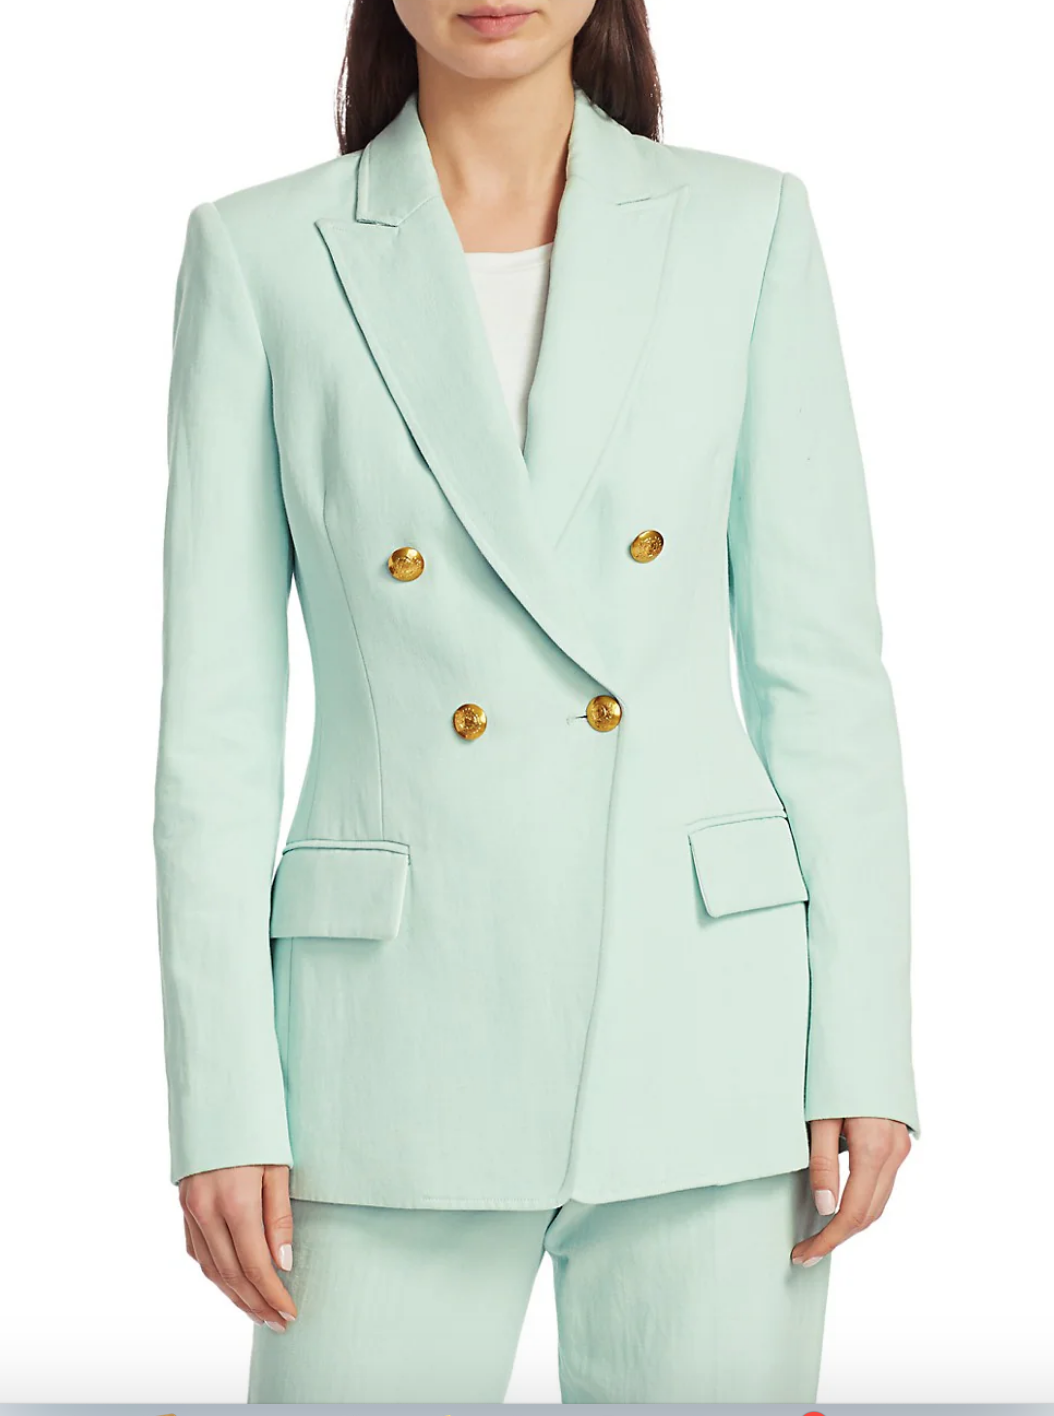 Taylor Armstrong's Mint Blazer